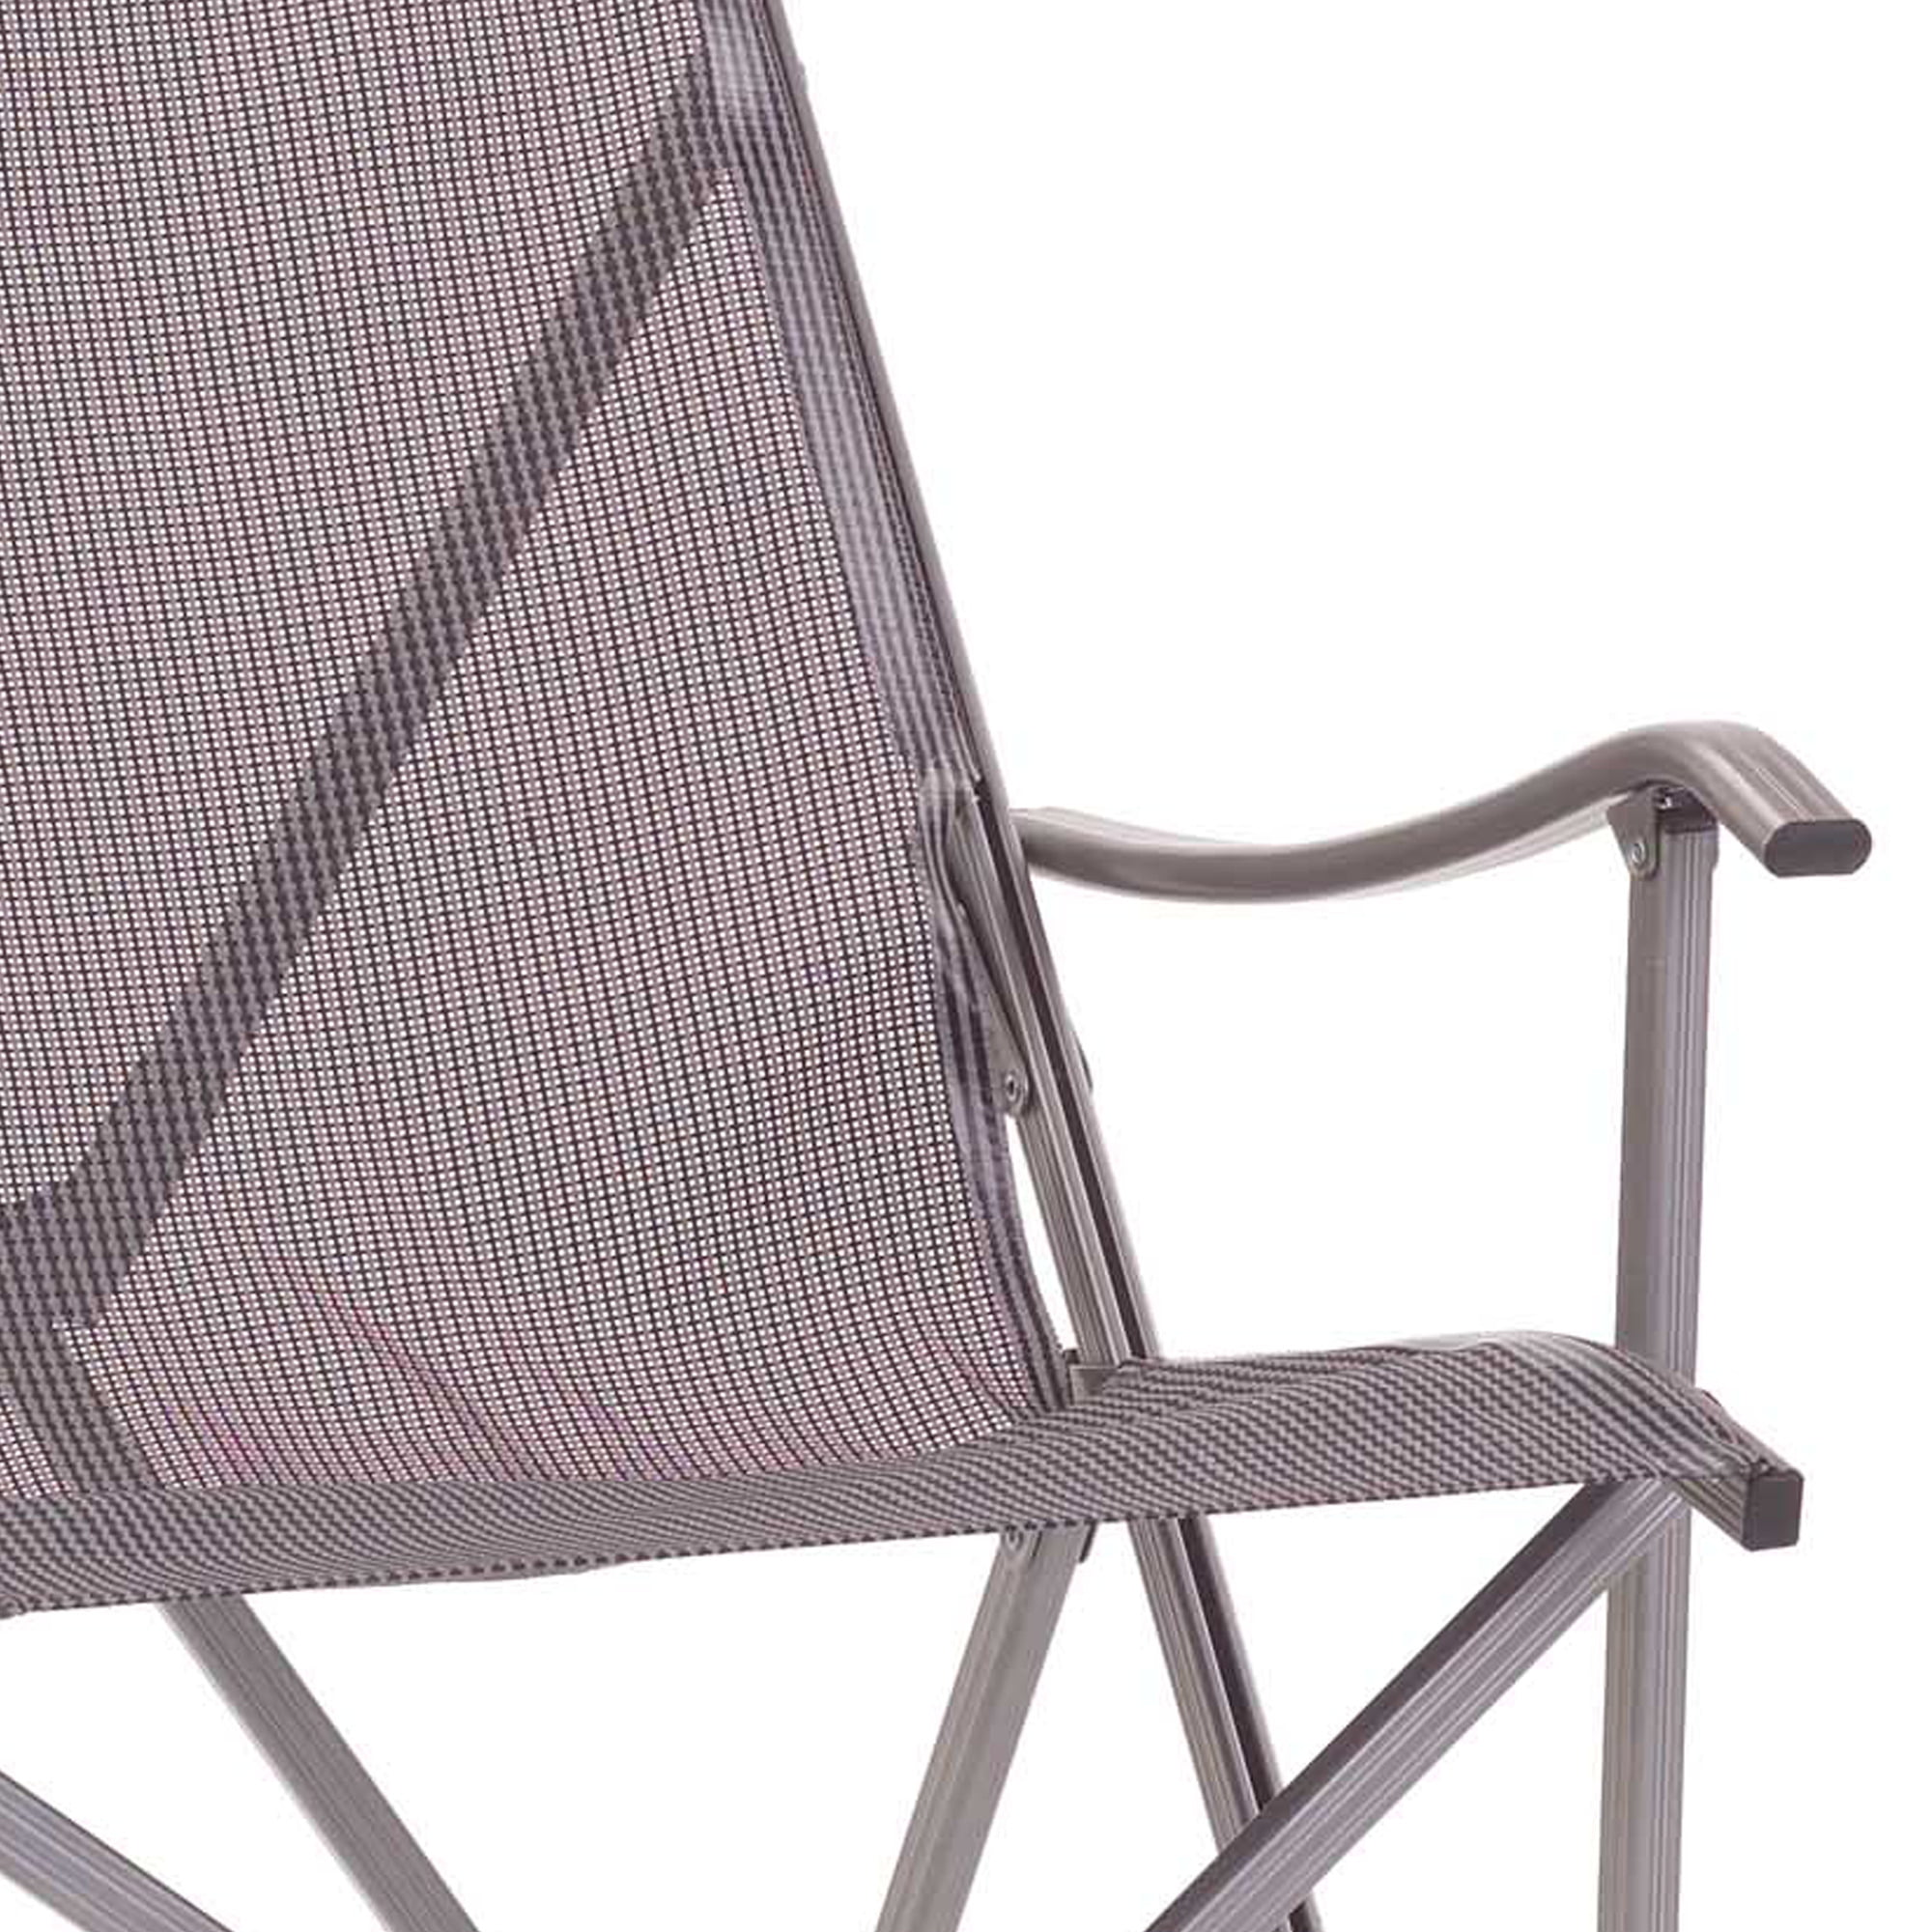 coleman patio sling chair